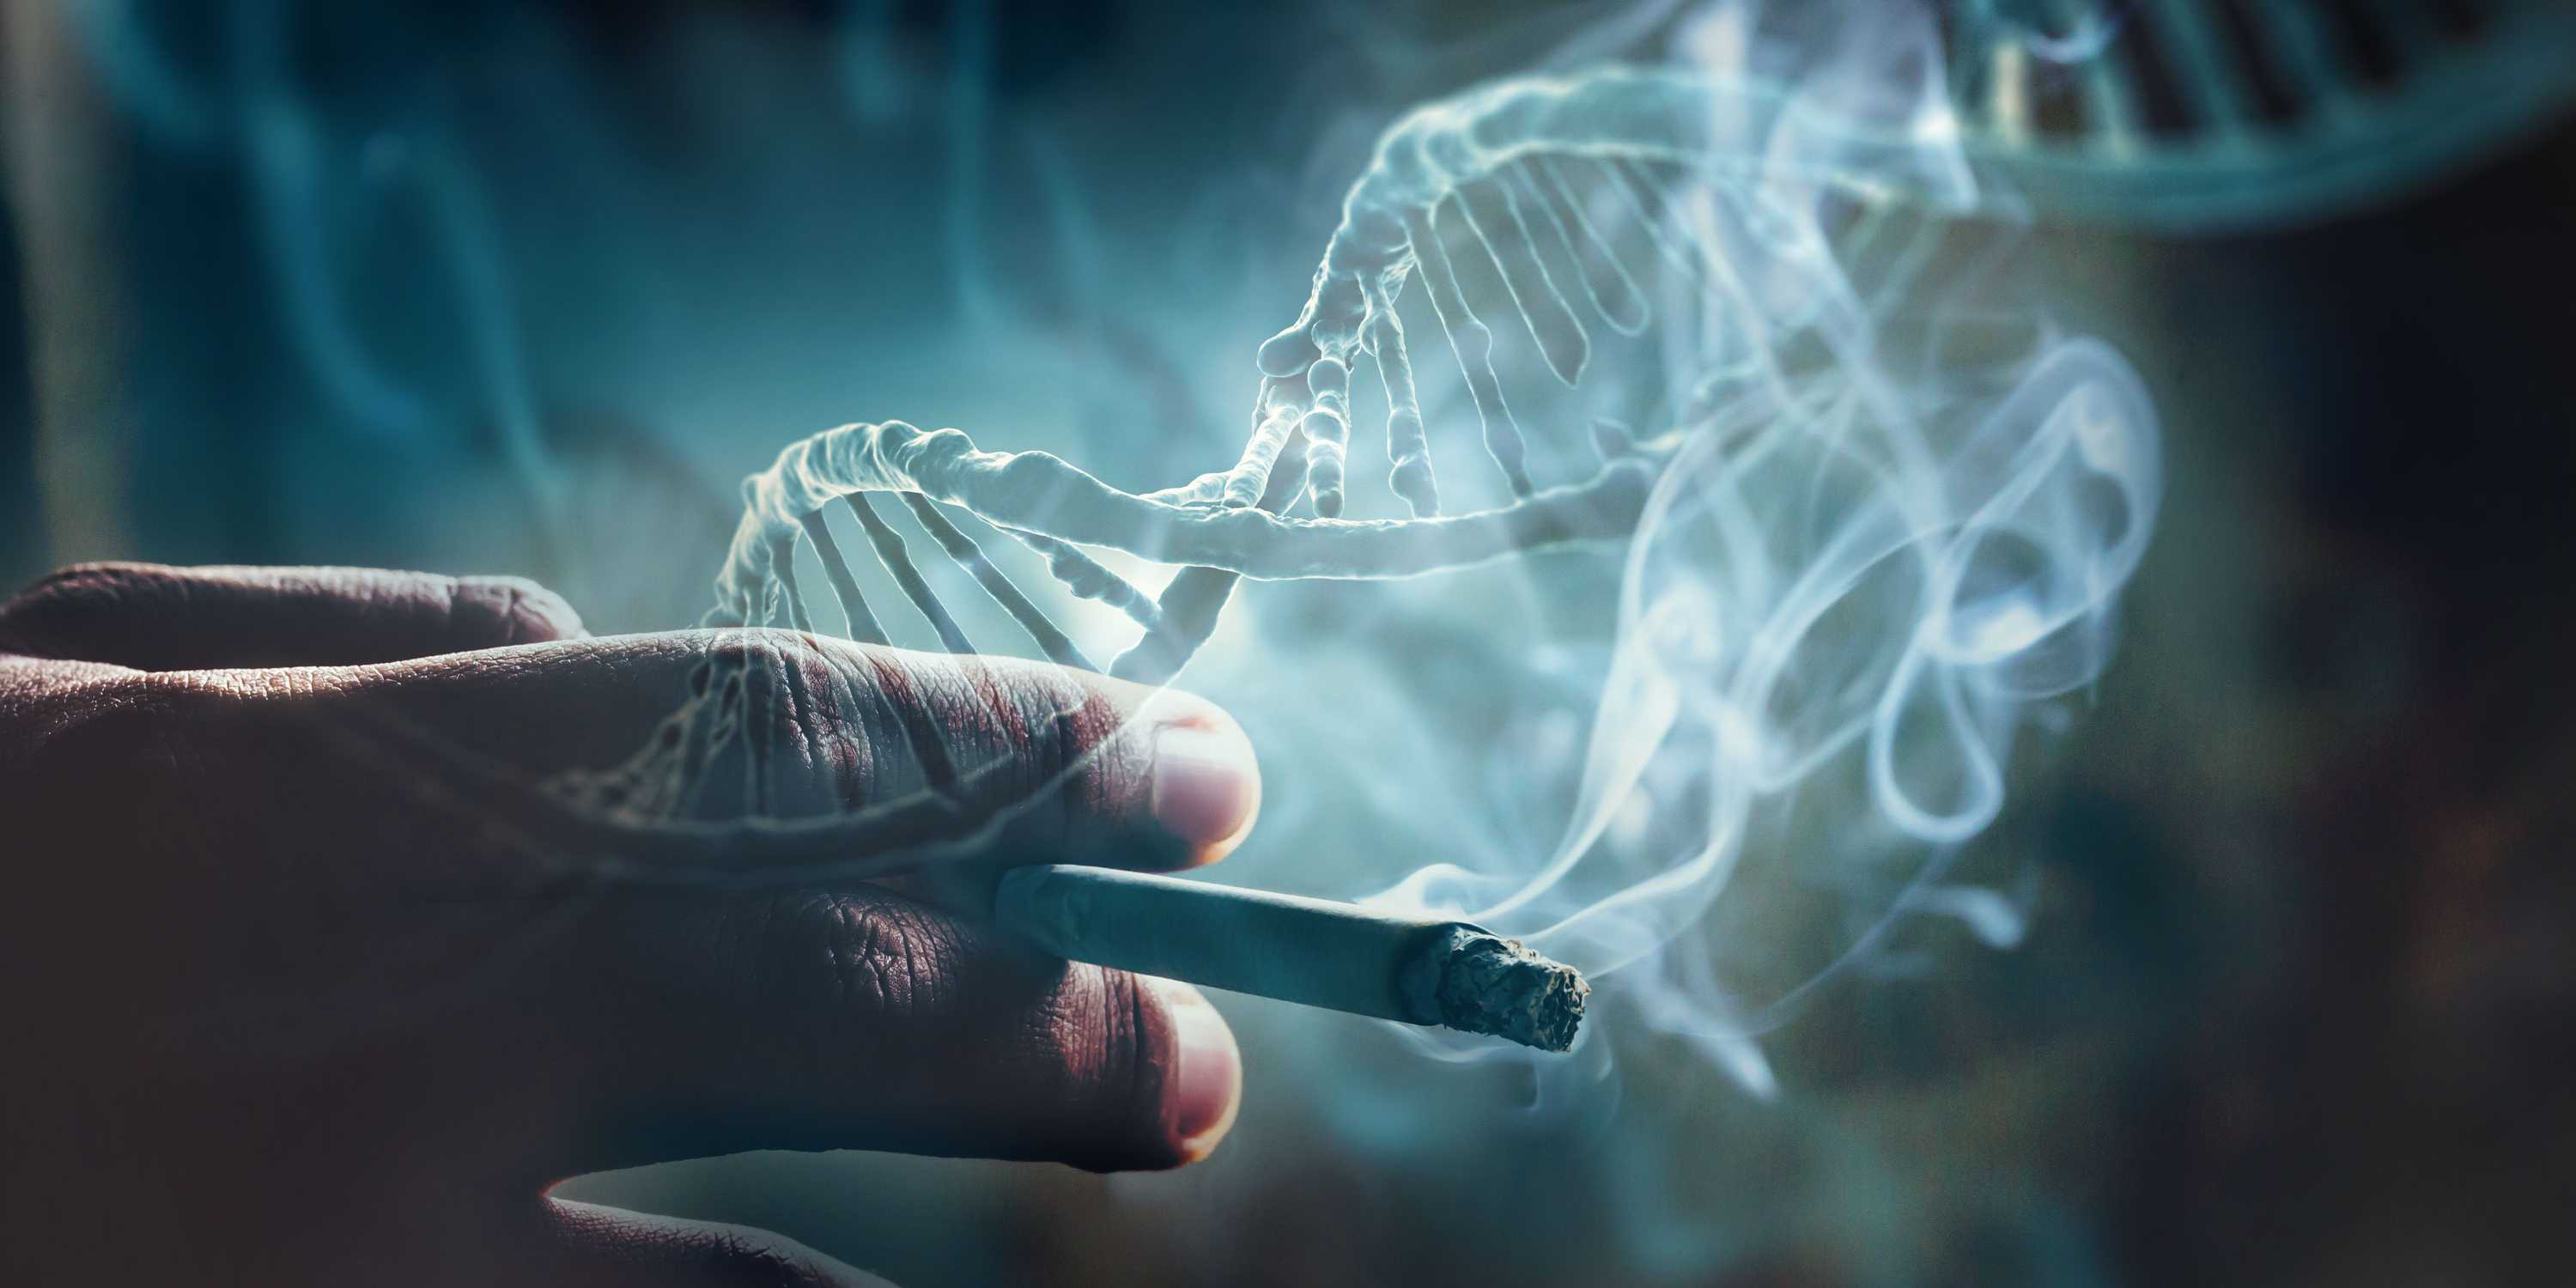 The image shows a hand holding a cigarette. Above it are strands of DNA that appear to be shimmering through.